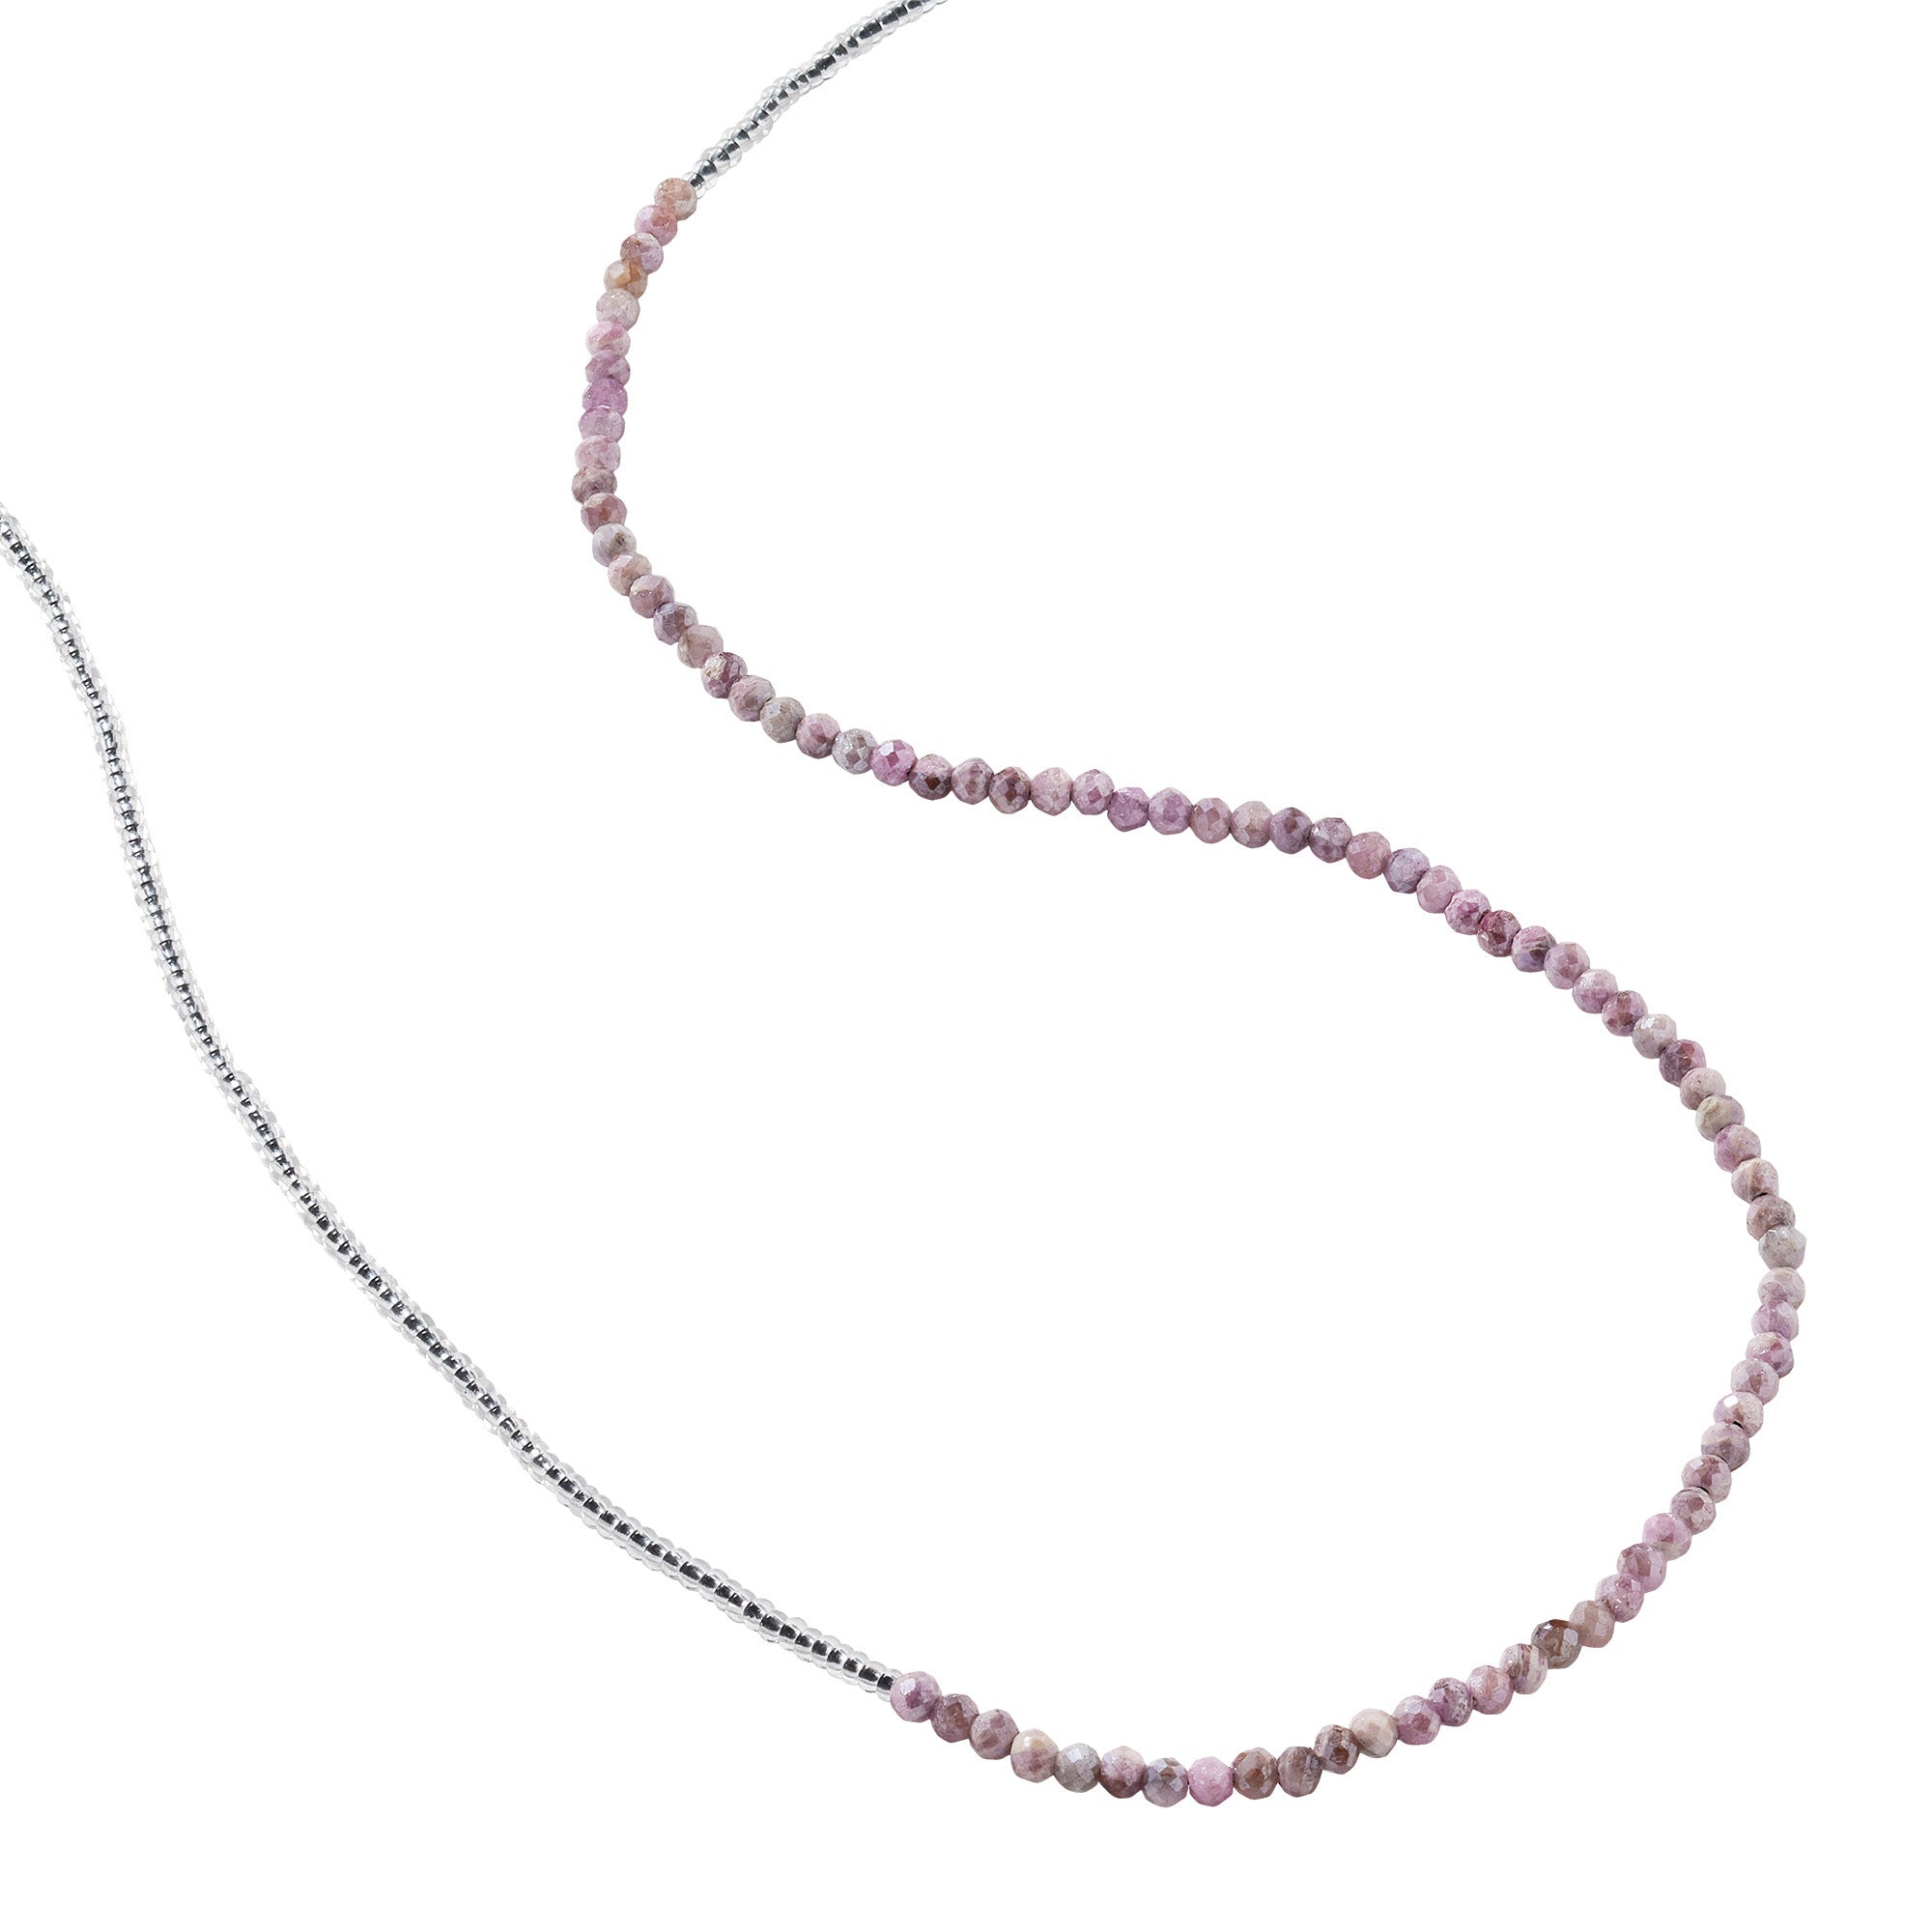 Clear Seed and Pink Silverite Double Beaded Necklace